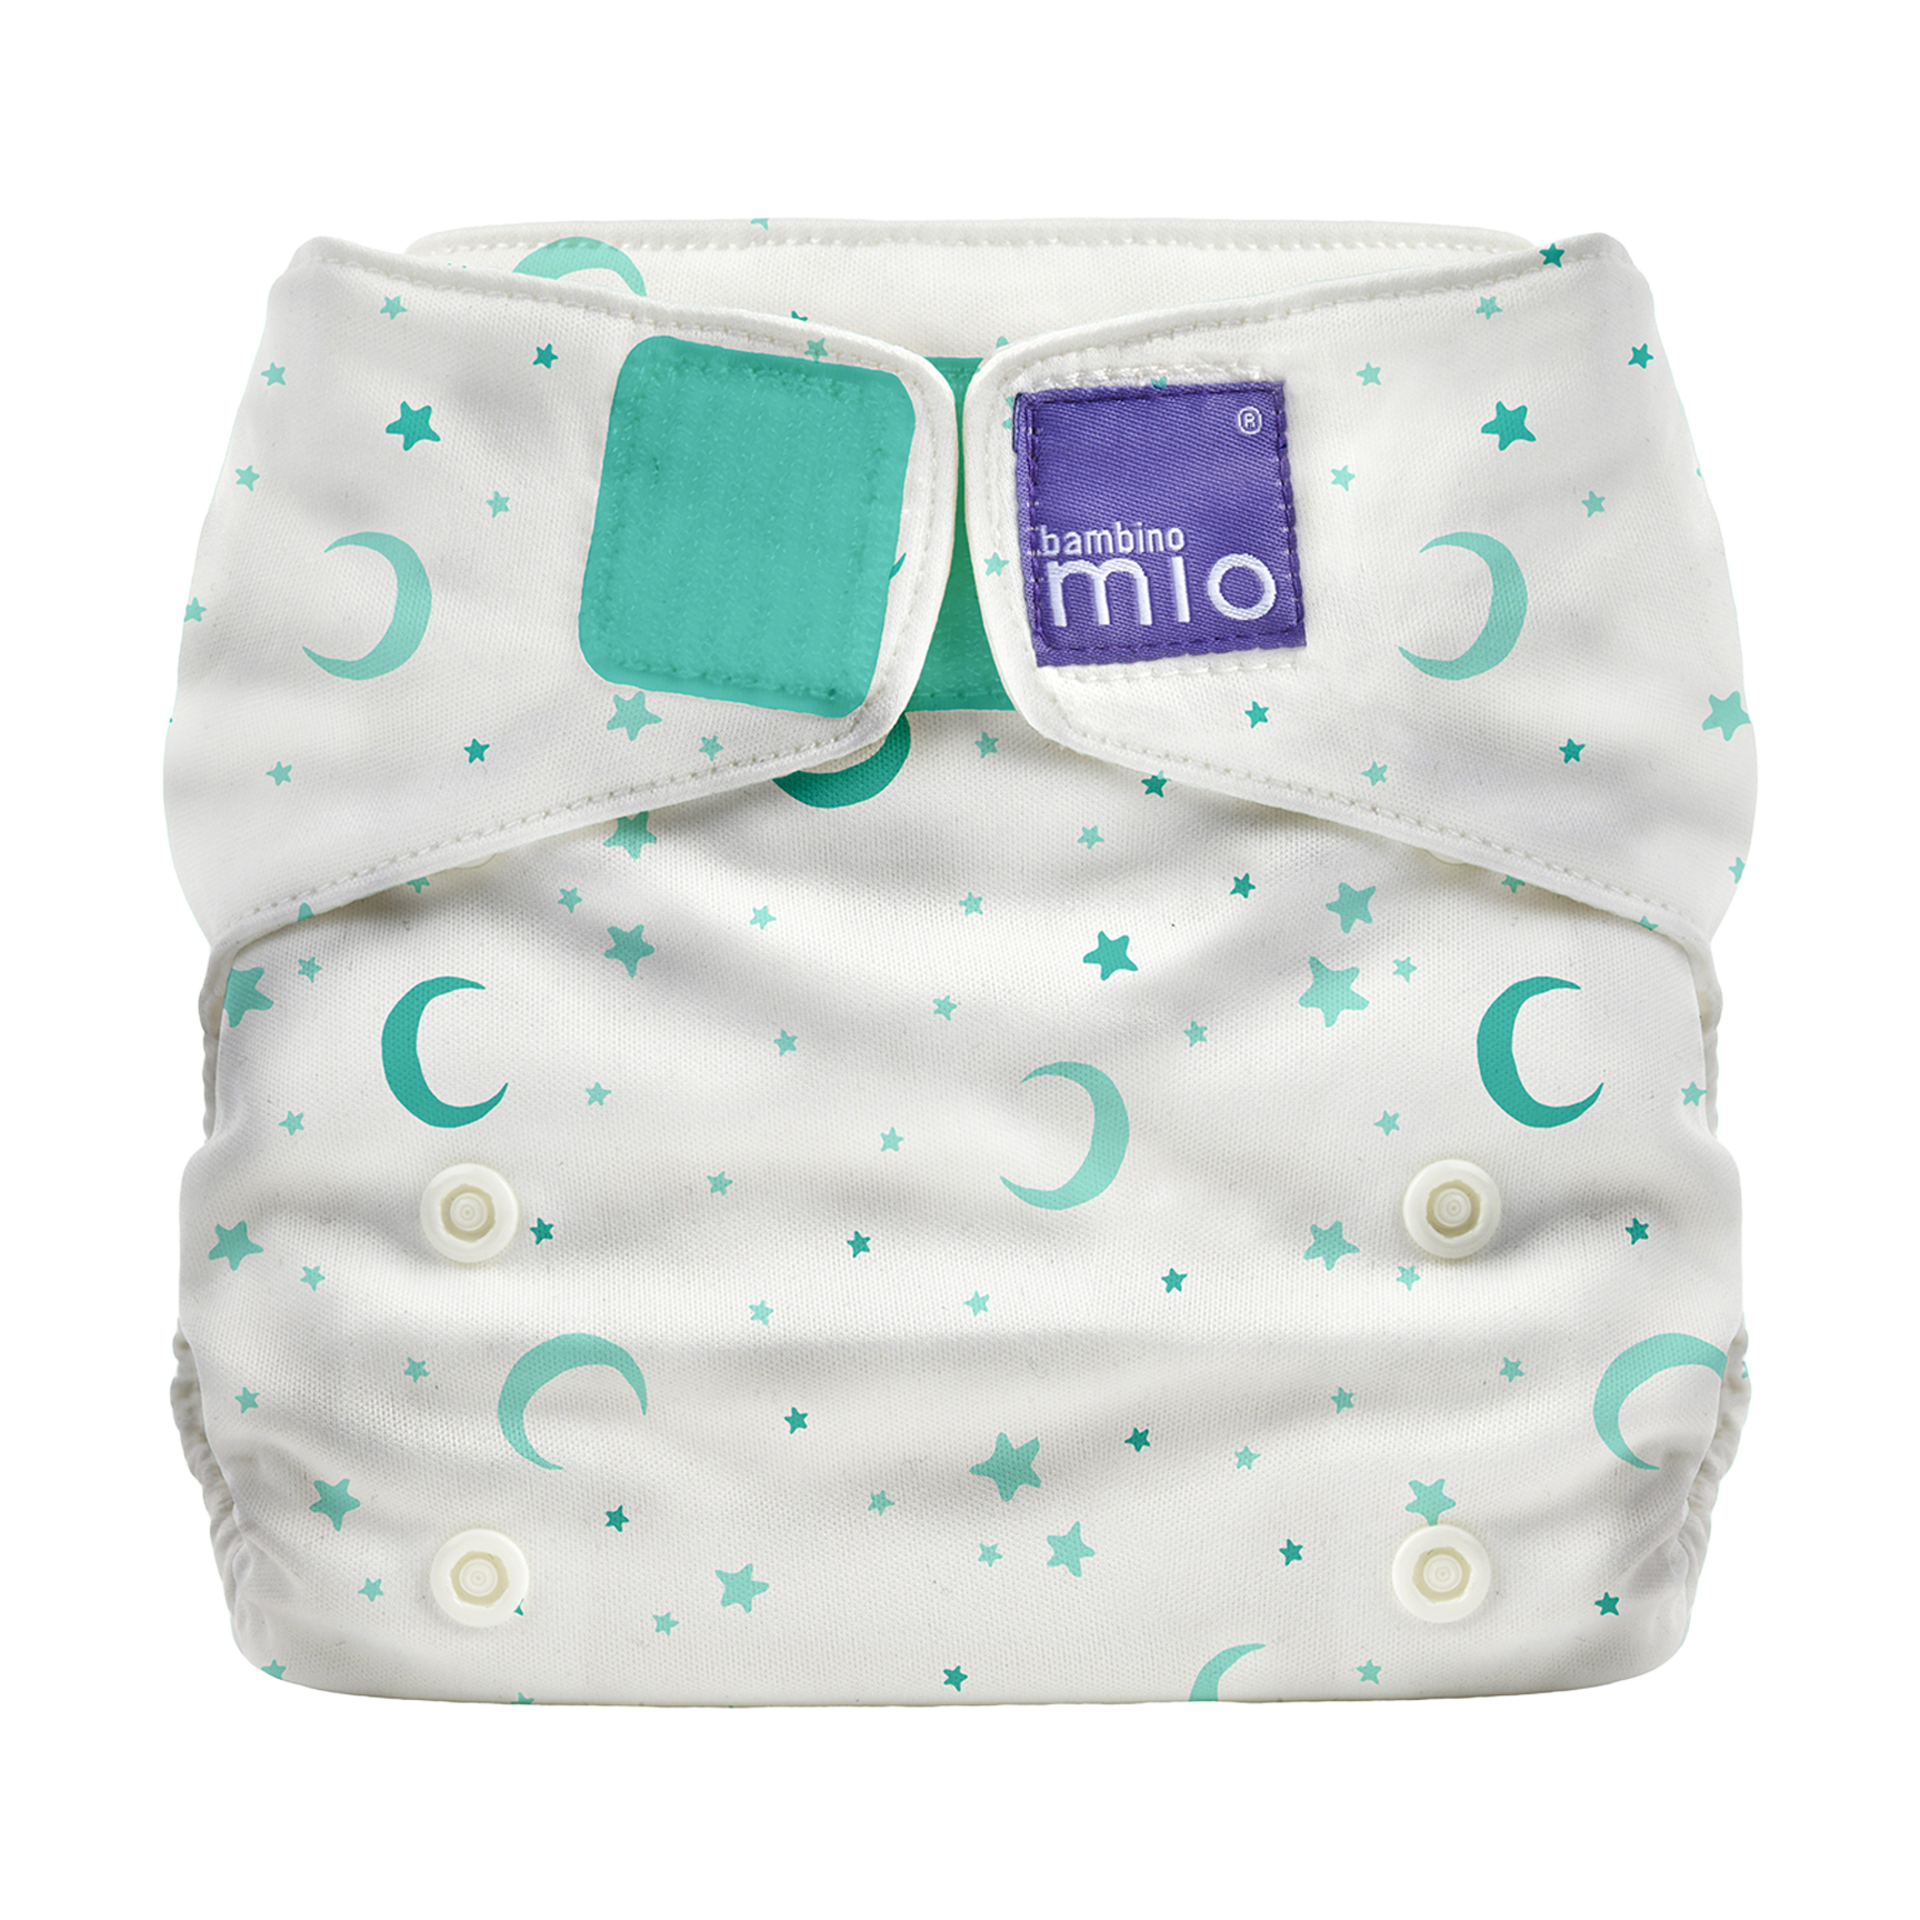 reusable cloth diapers for babies